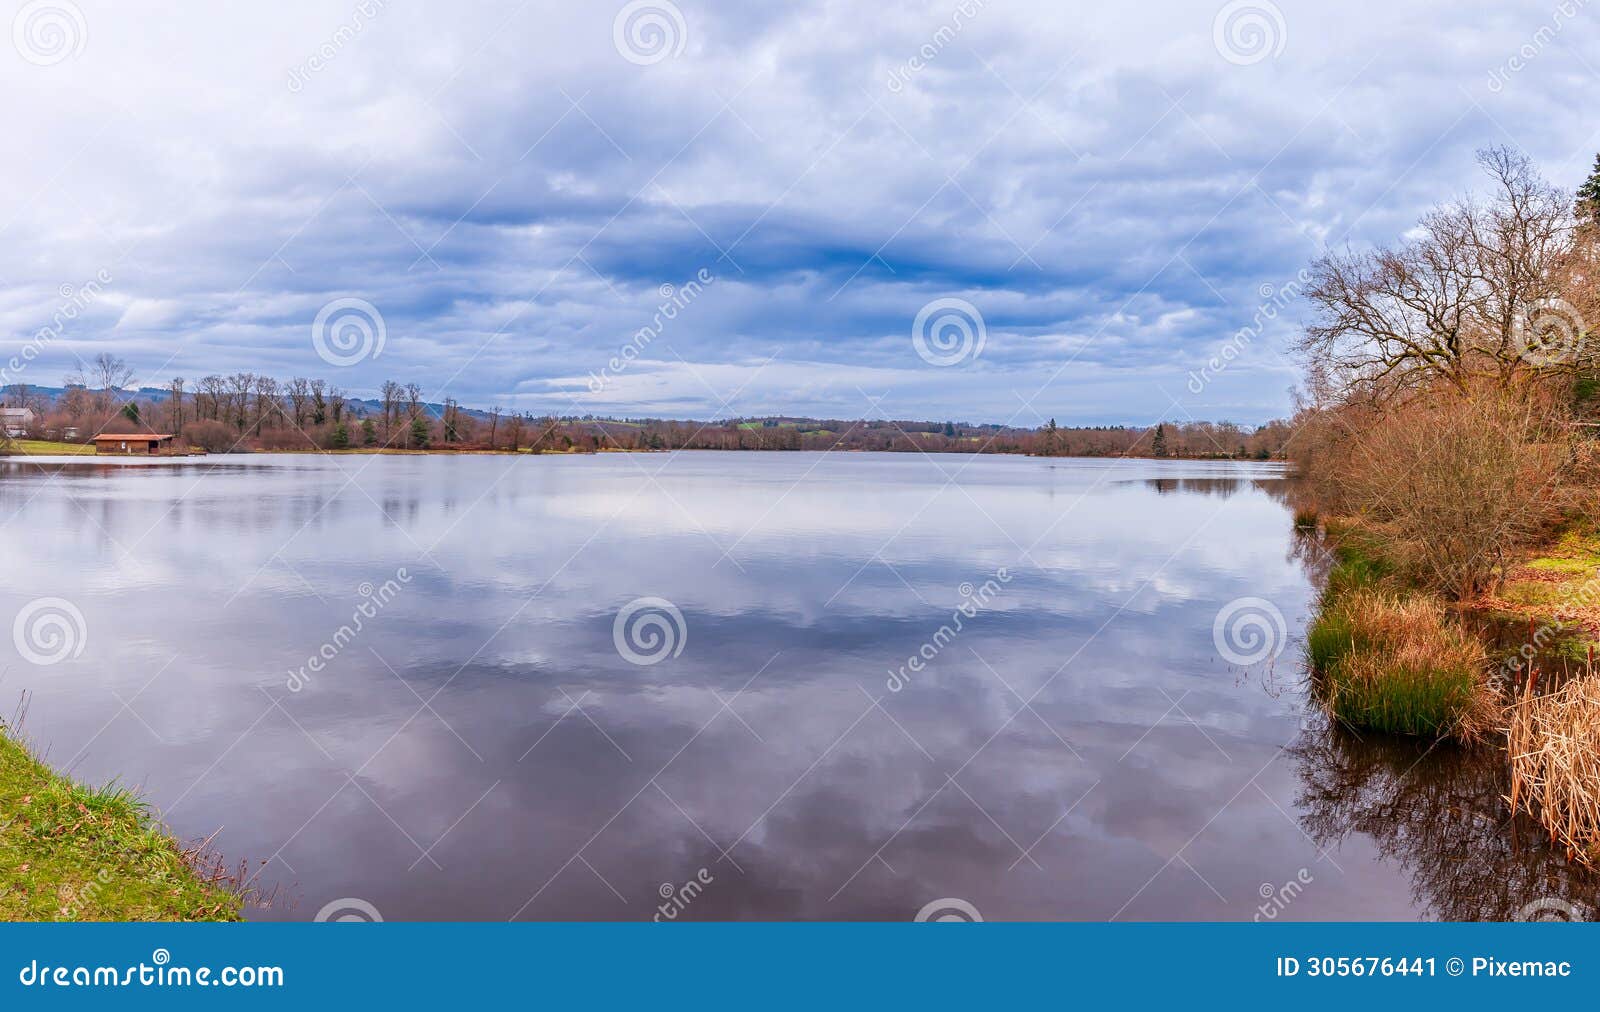 the etang de cieux and countryside in winter, in haute-vienne, nouvelle-aquitaine, france